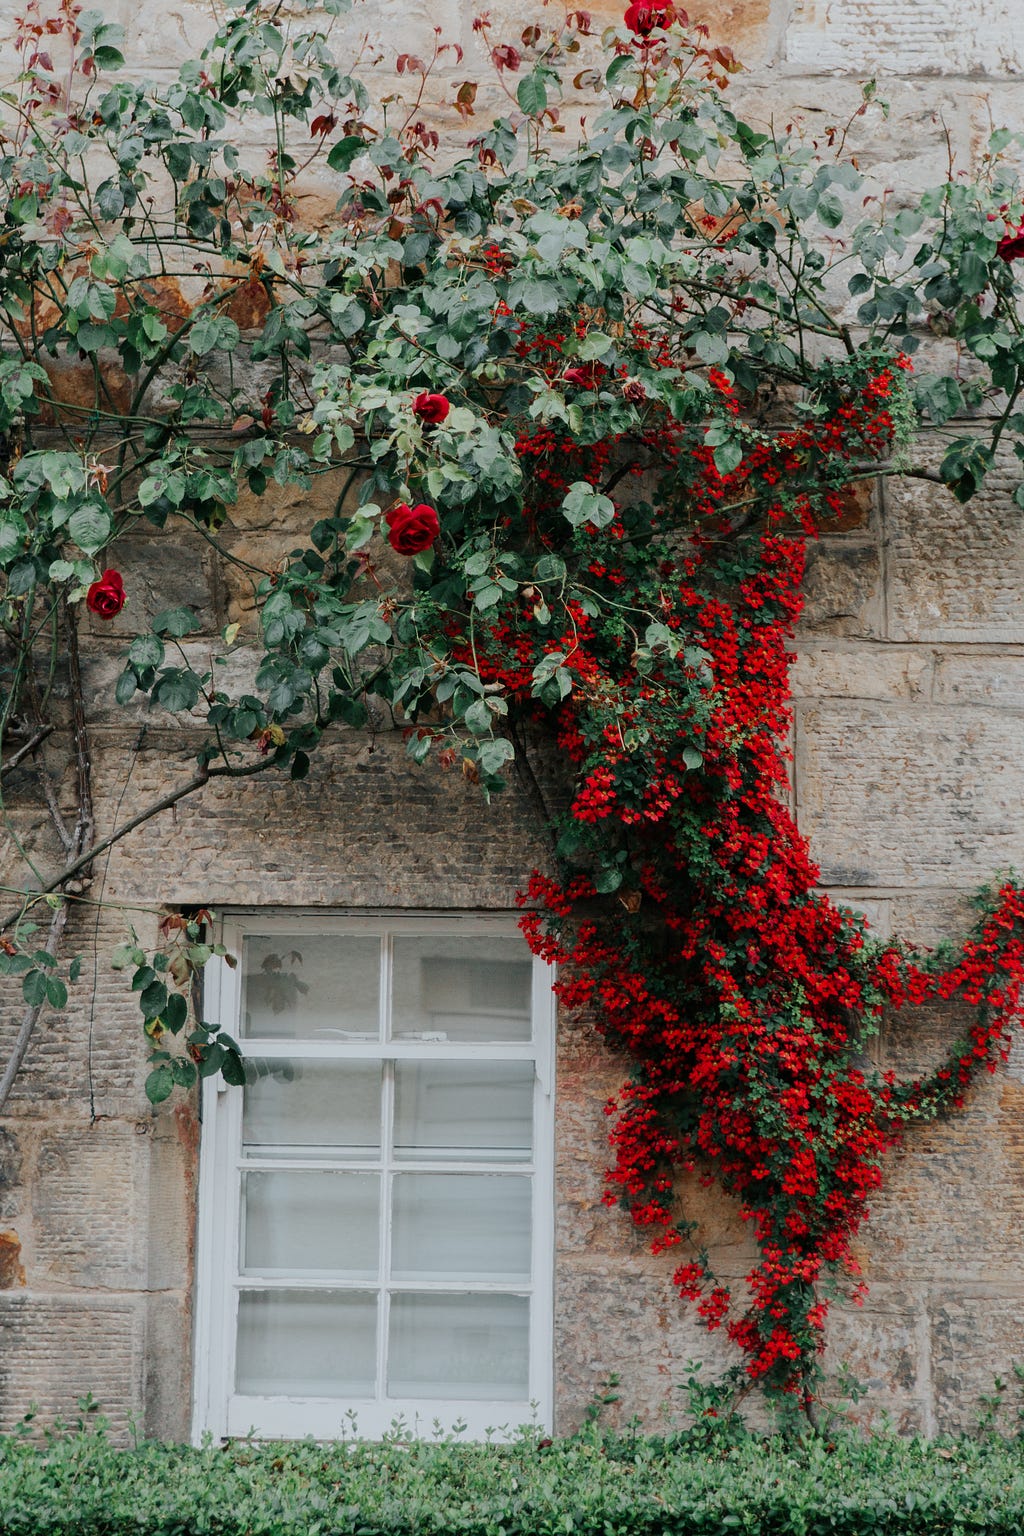 Climbing plant with red flowers around a wall.